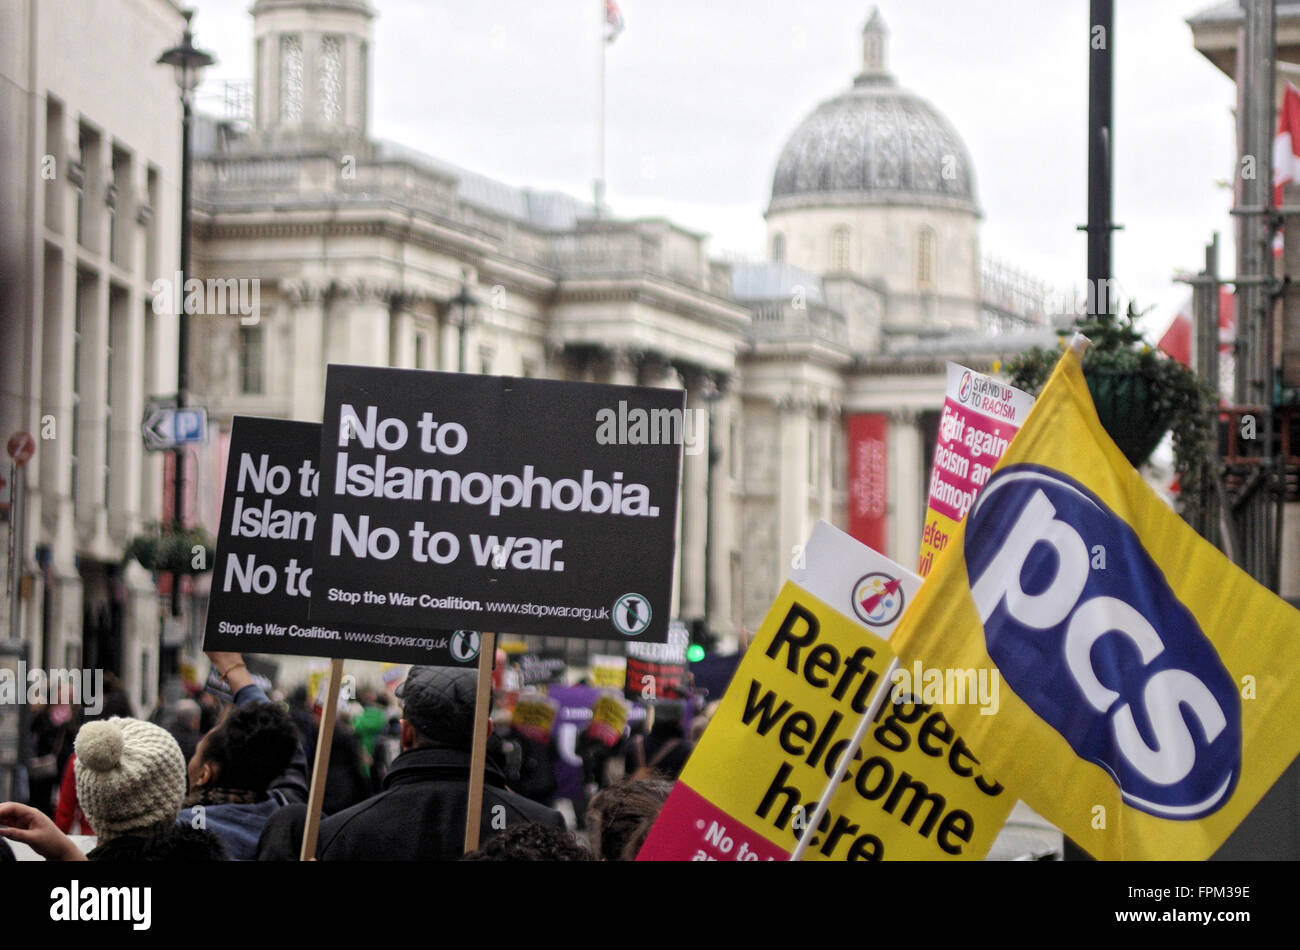 London, UK. Saturday 19th March 2016. Thousands march down Regent Street to Trafalgar Square in a Refugees Welcome march, carrying banners and placards with anti-rascist slogans supporting refugees. Stock Photo